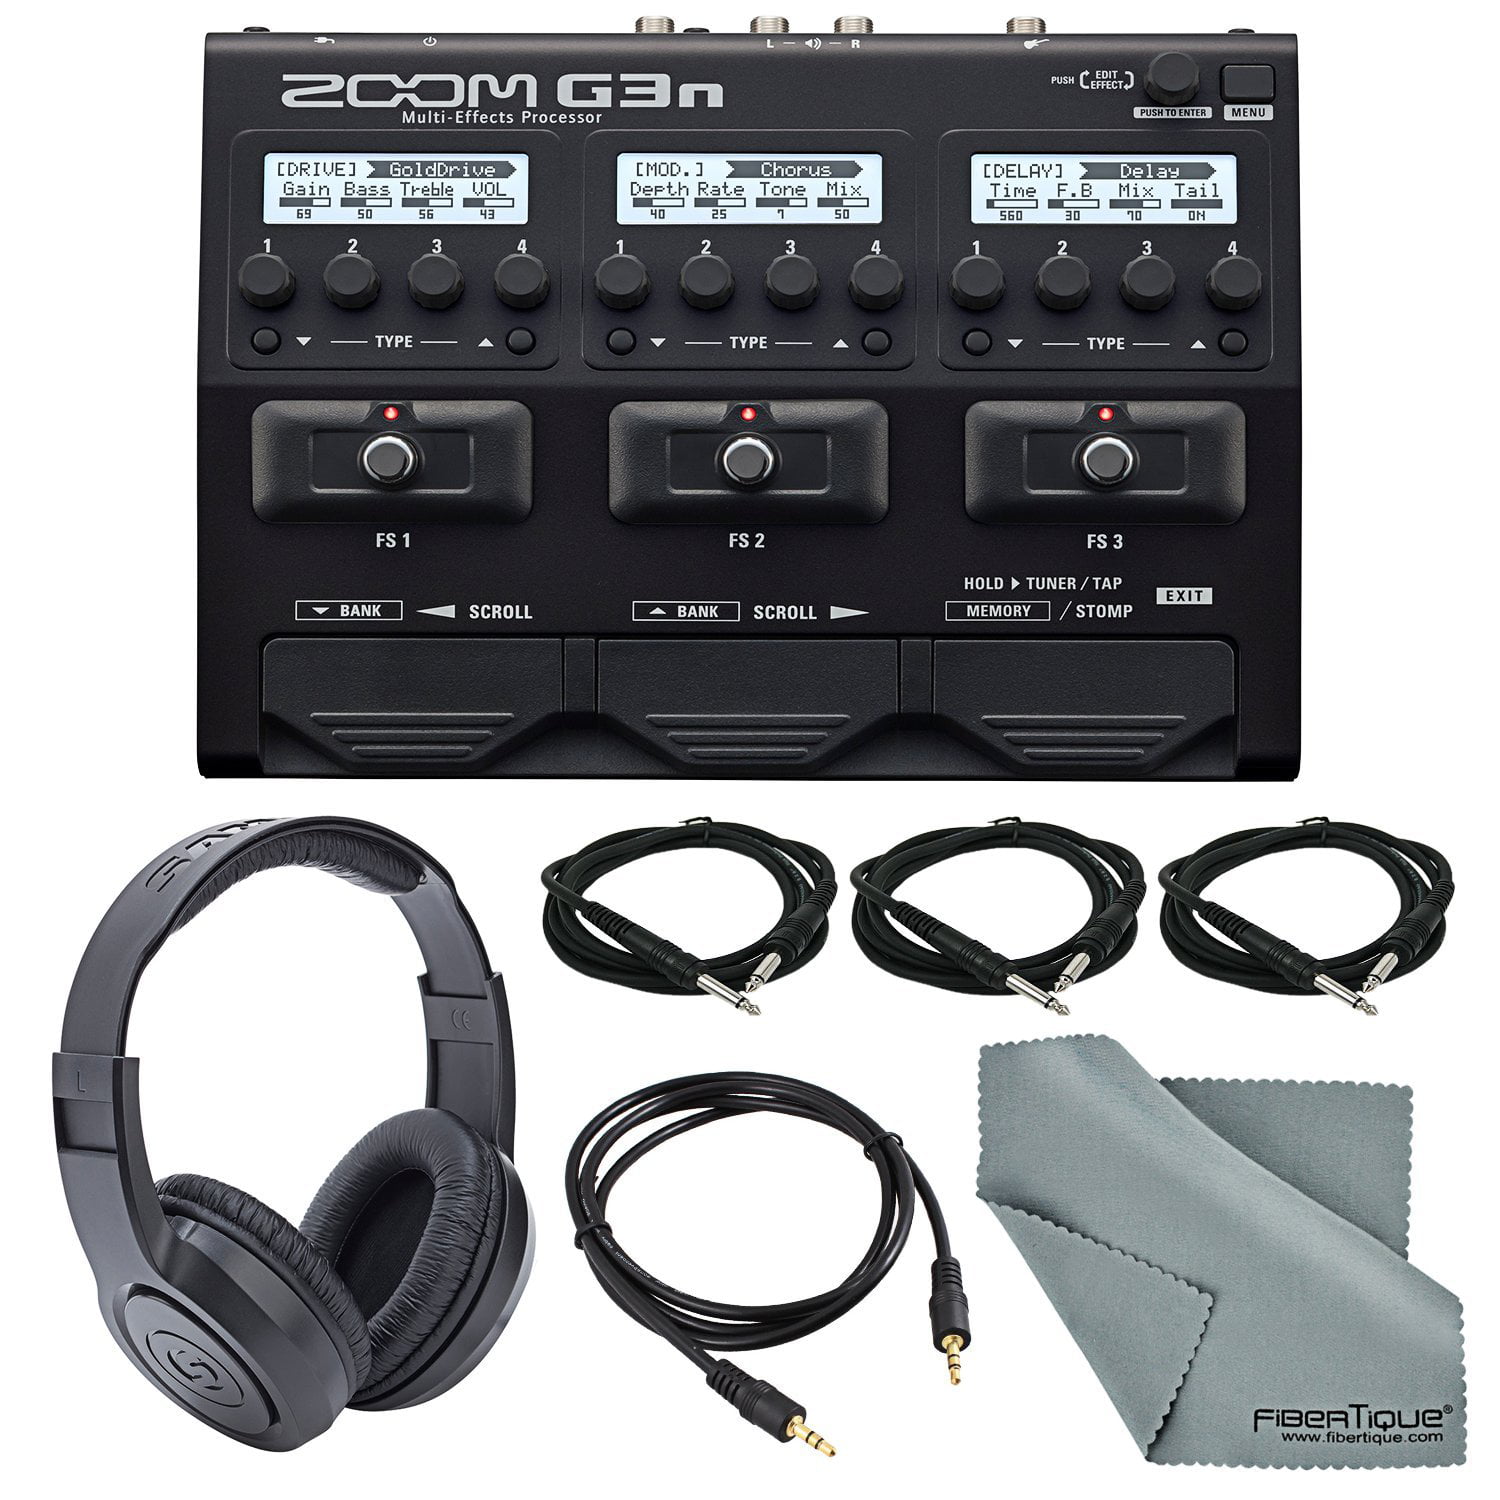 Zoom G3n Multi-Effects Processor for Electric Guitar Deluxe Bundle with 3 X  1/4 Inch Cables + Aux Cable+ Samson Stereo Headphones + Fibertique 